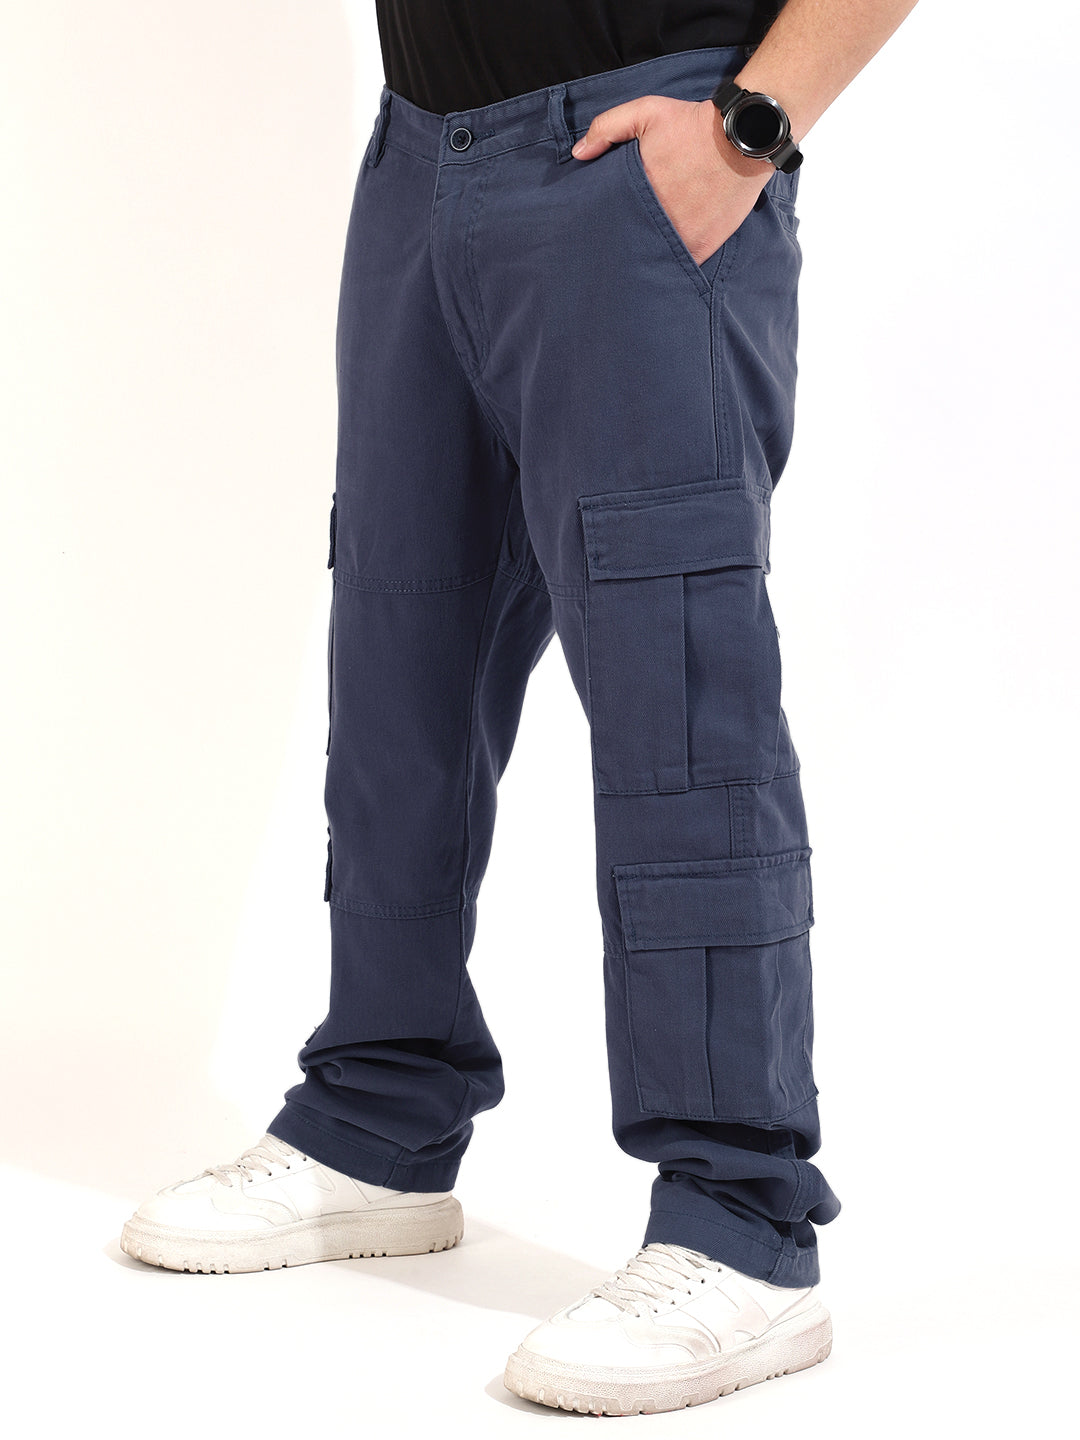 Ash Grey Cotton Drill Baggy Fit 8 pocket Cargo